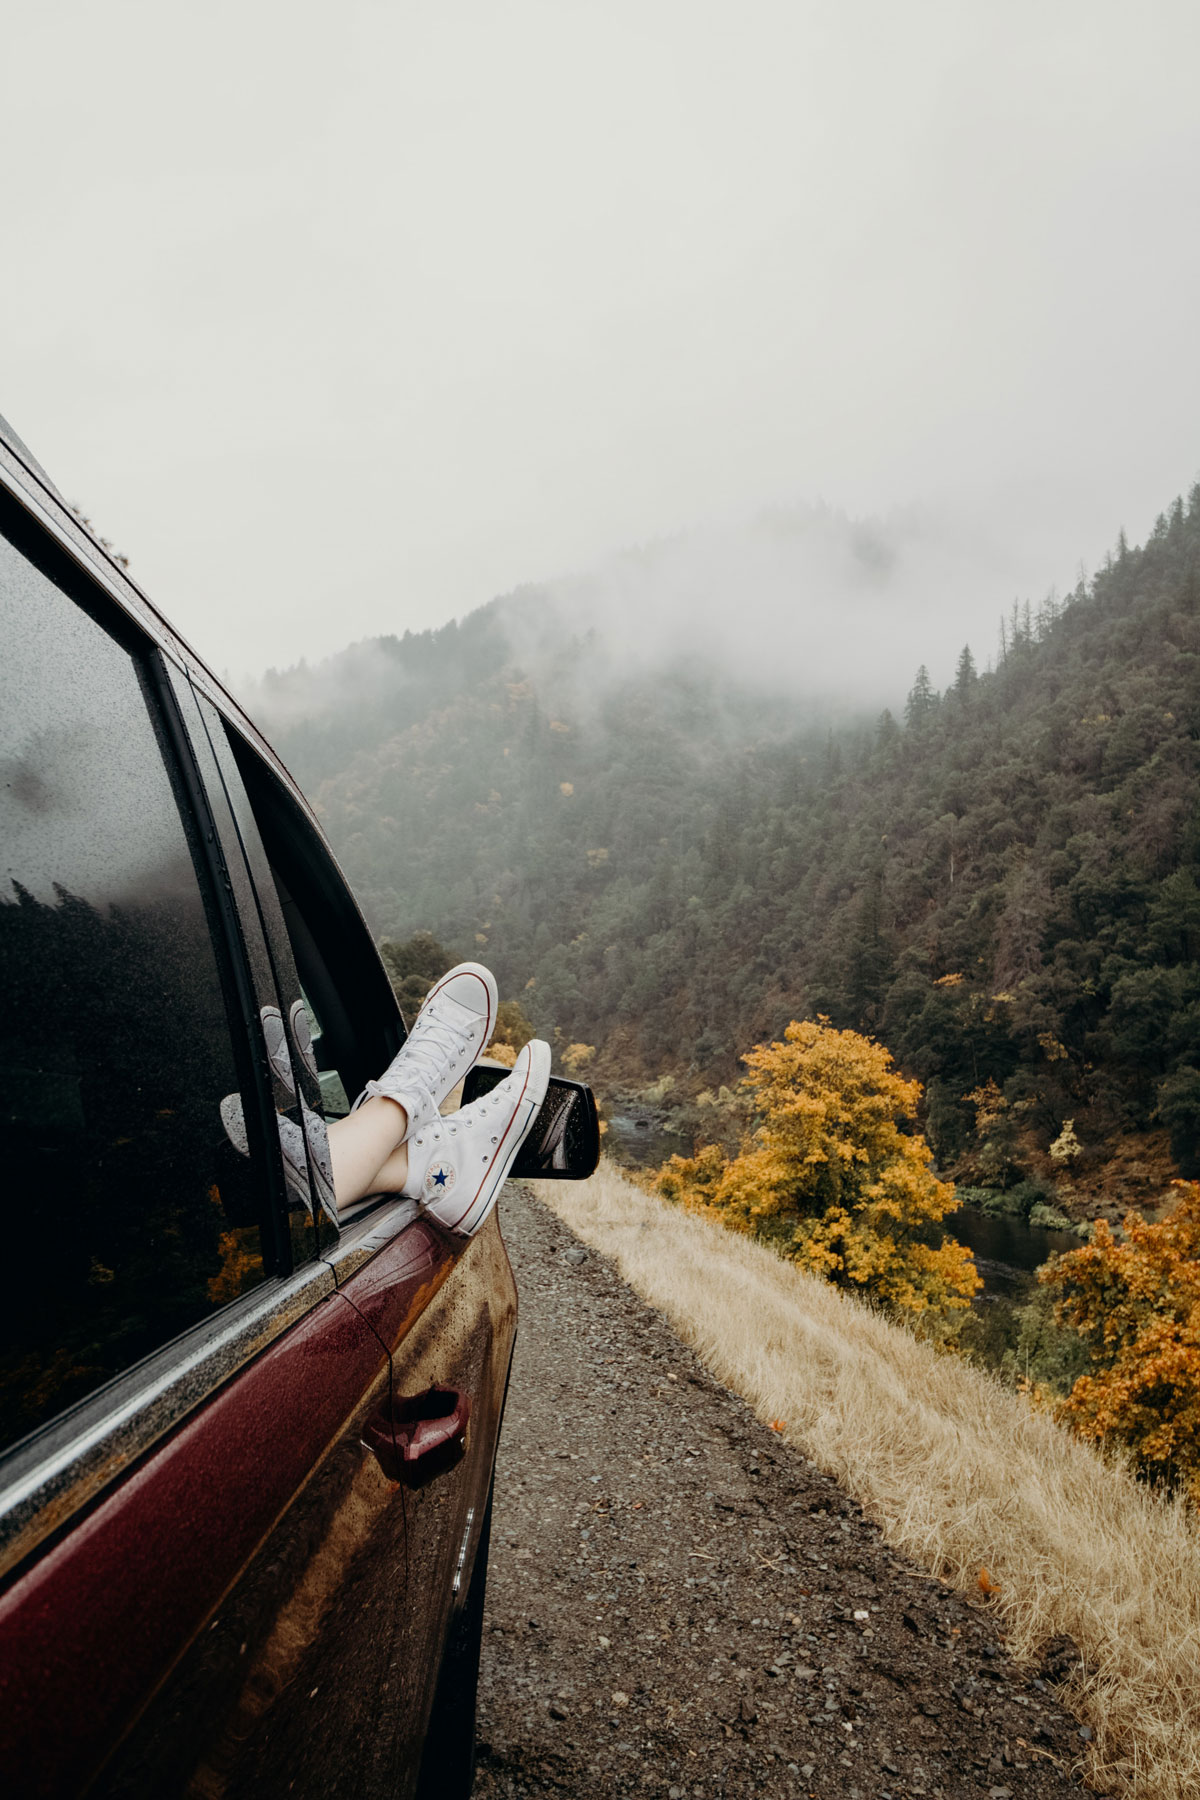 Five tips for any road trip with your partner